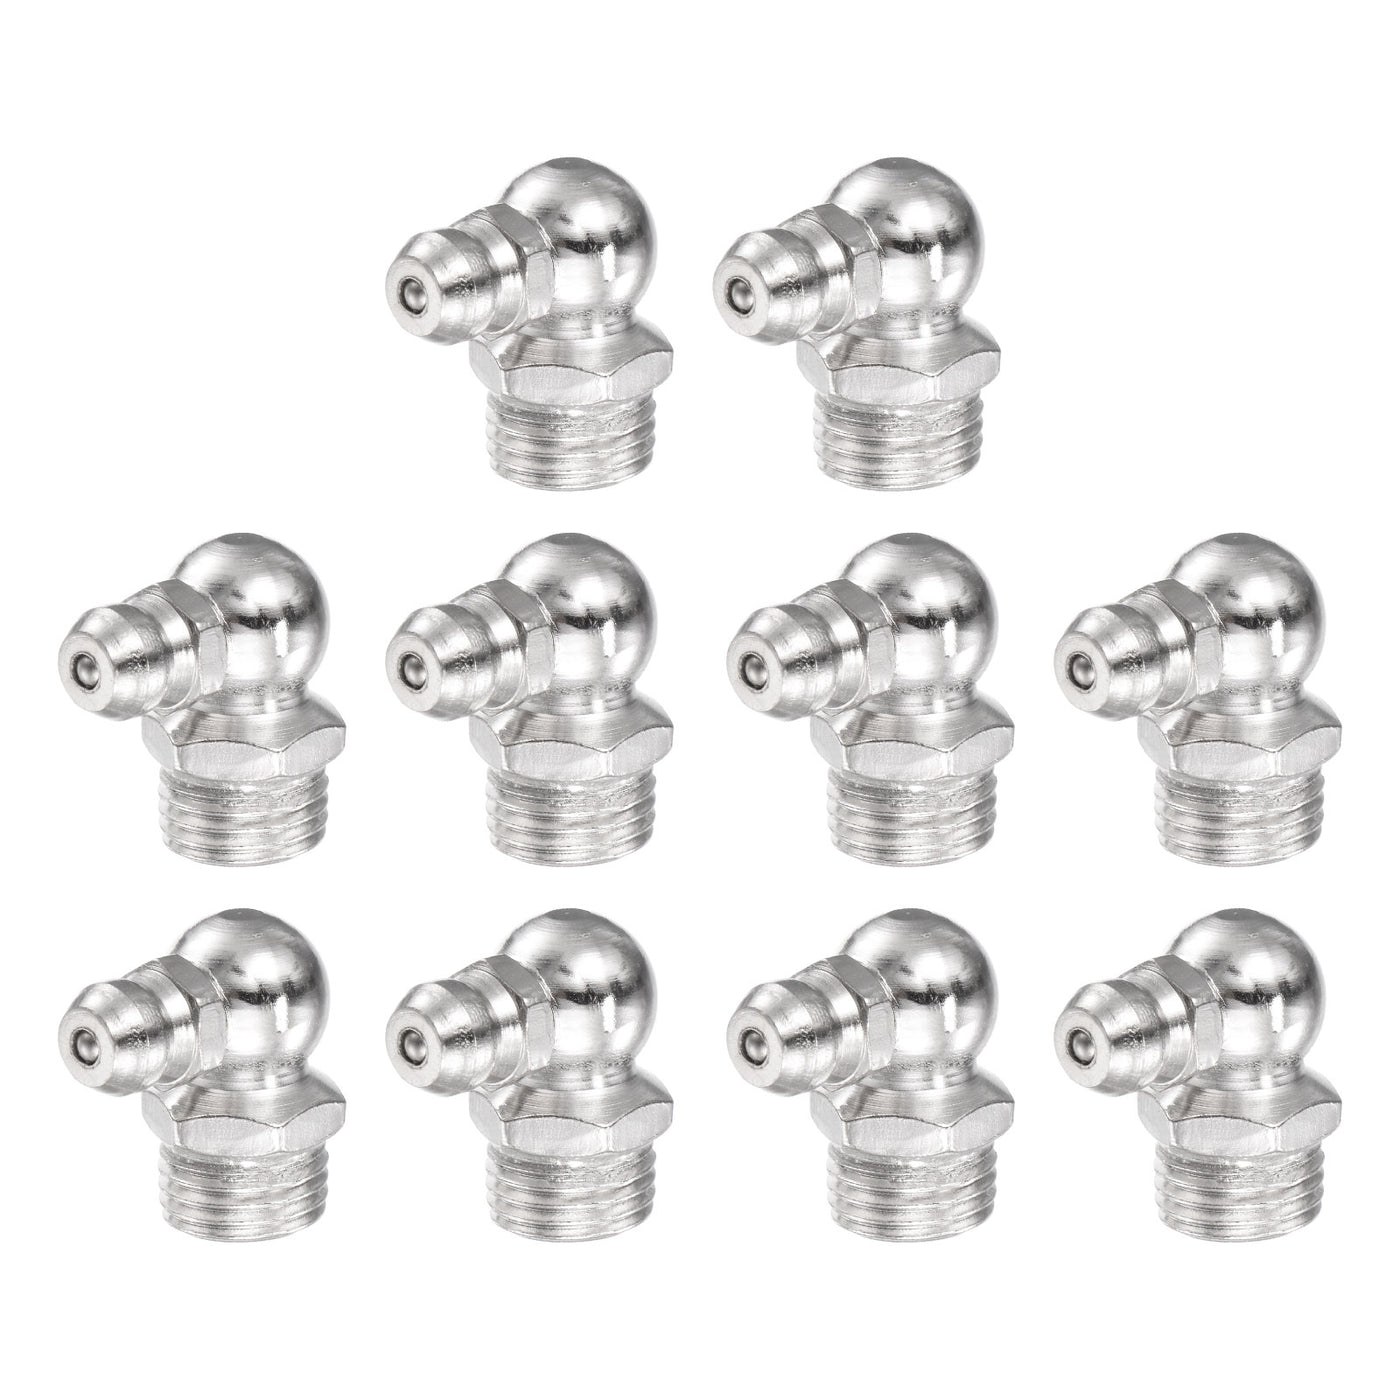 Uxcell Uxcell Nickel-Plated Iron 90 Degree Hydraulic Grease Fitting M8 x 1mm Thread, 20Pcs